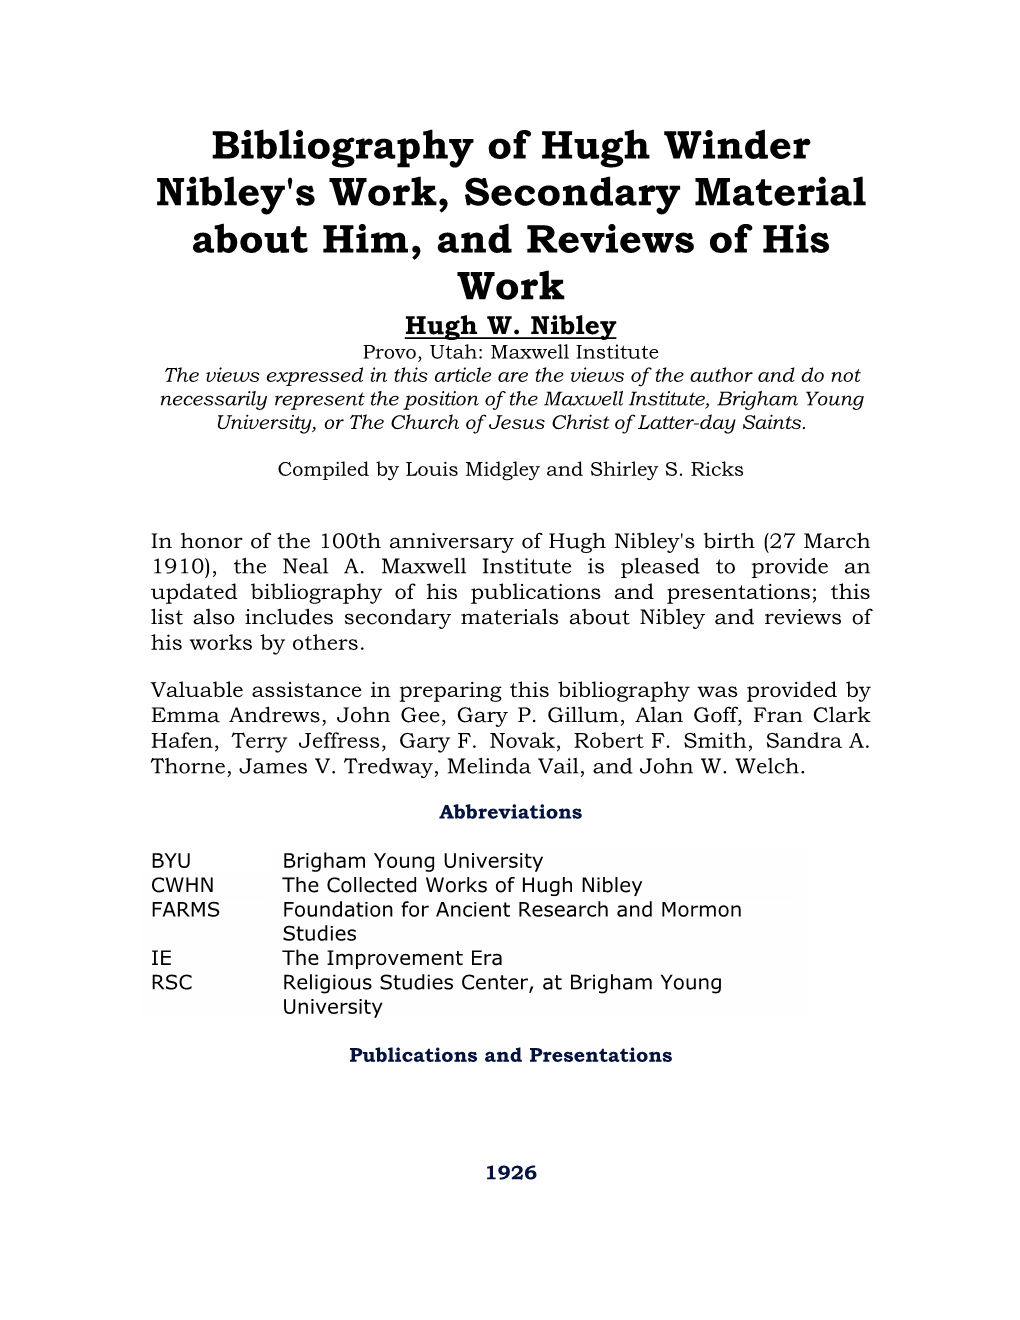 Bibliography of Hugh Winder Nibley's Work, Secondary Material About Him, and Reviews of His Work Hugh W